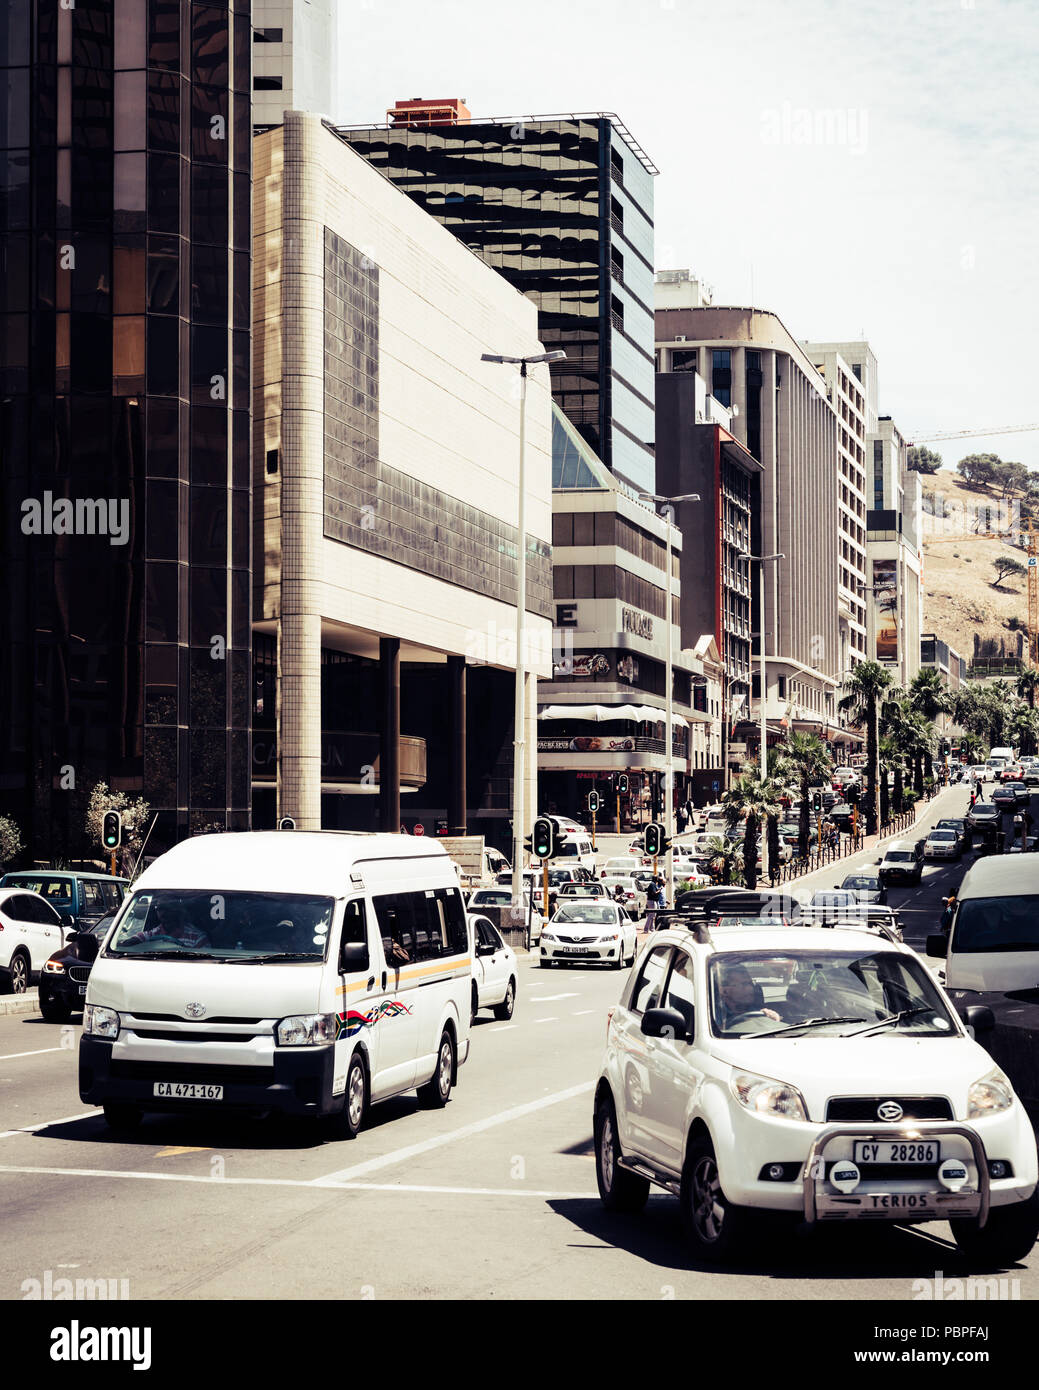 Cape Town, South Africa, February 9, 2018: Busy street with traffic in downtown Cape Town, South Africa Stock Photo